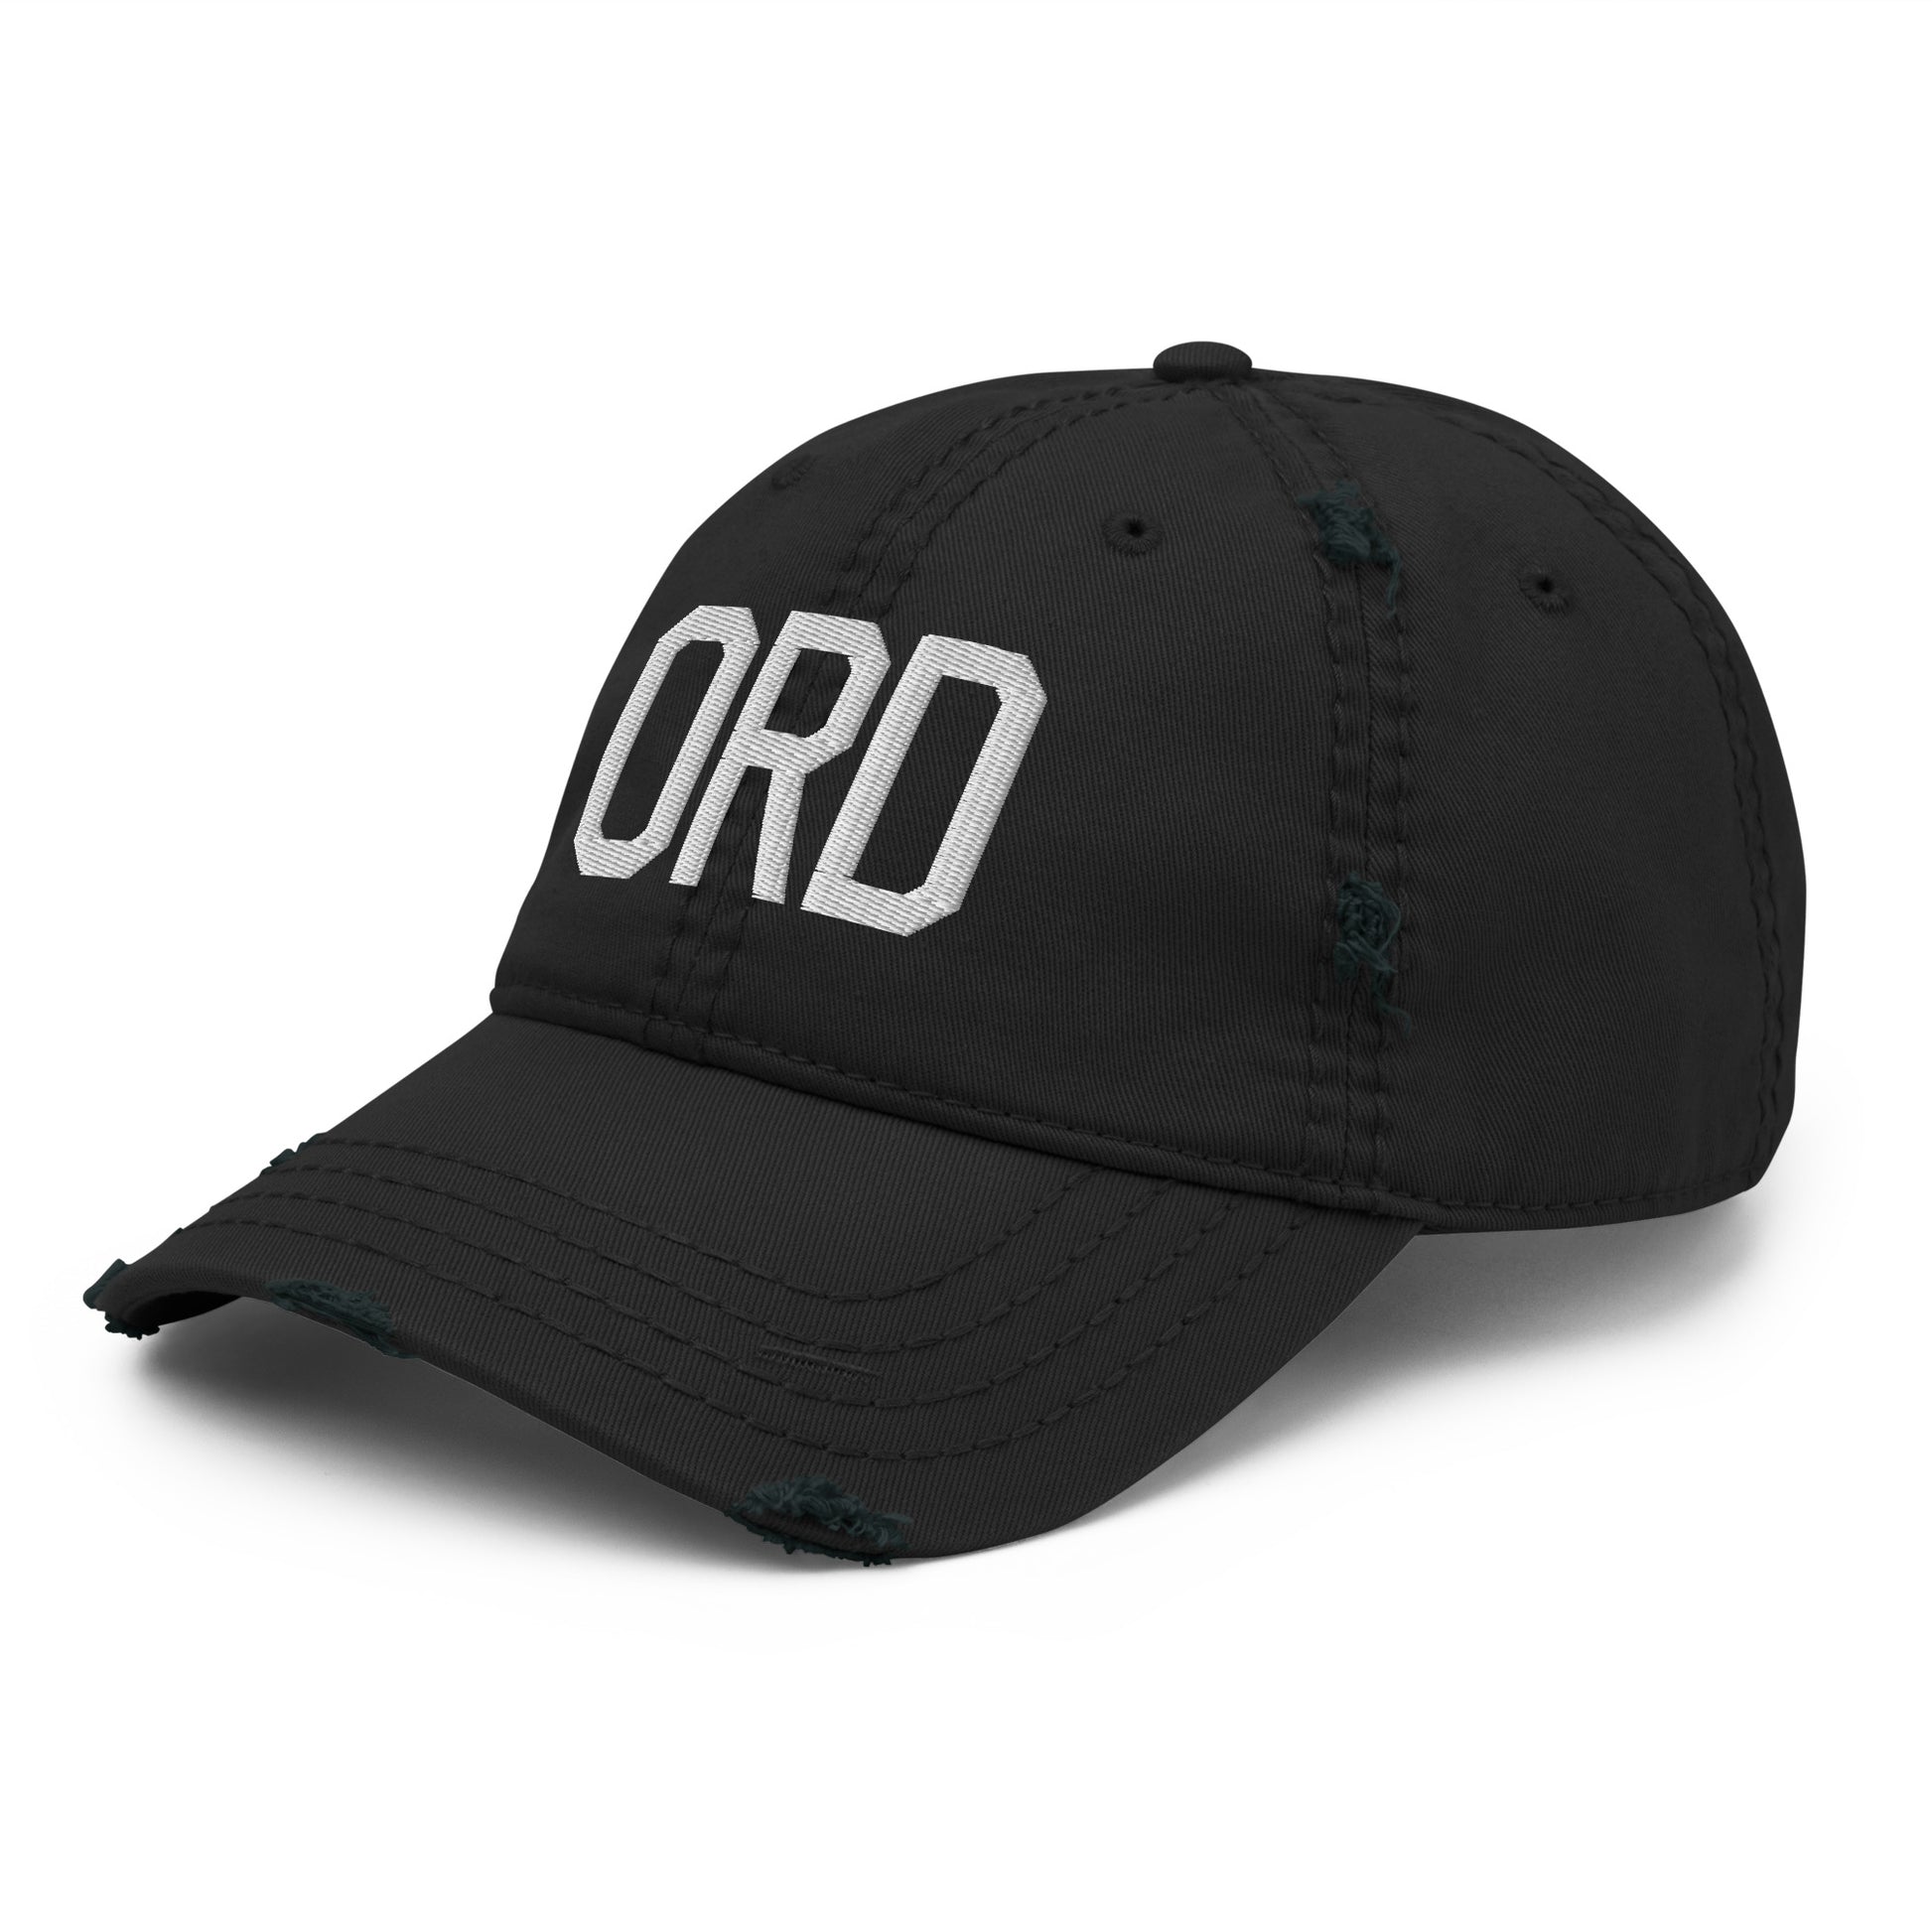 Airport Code Distressed Hat - White • ORD Chicago • YHM Designs - Image 11